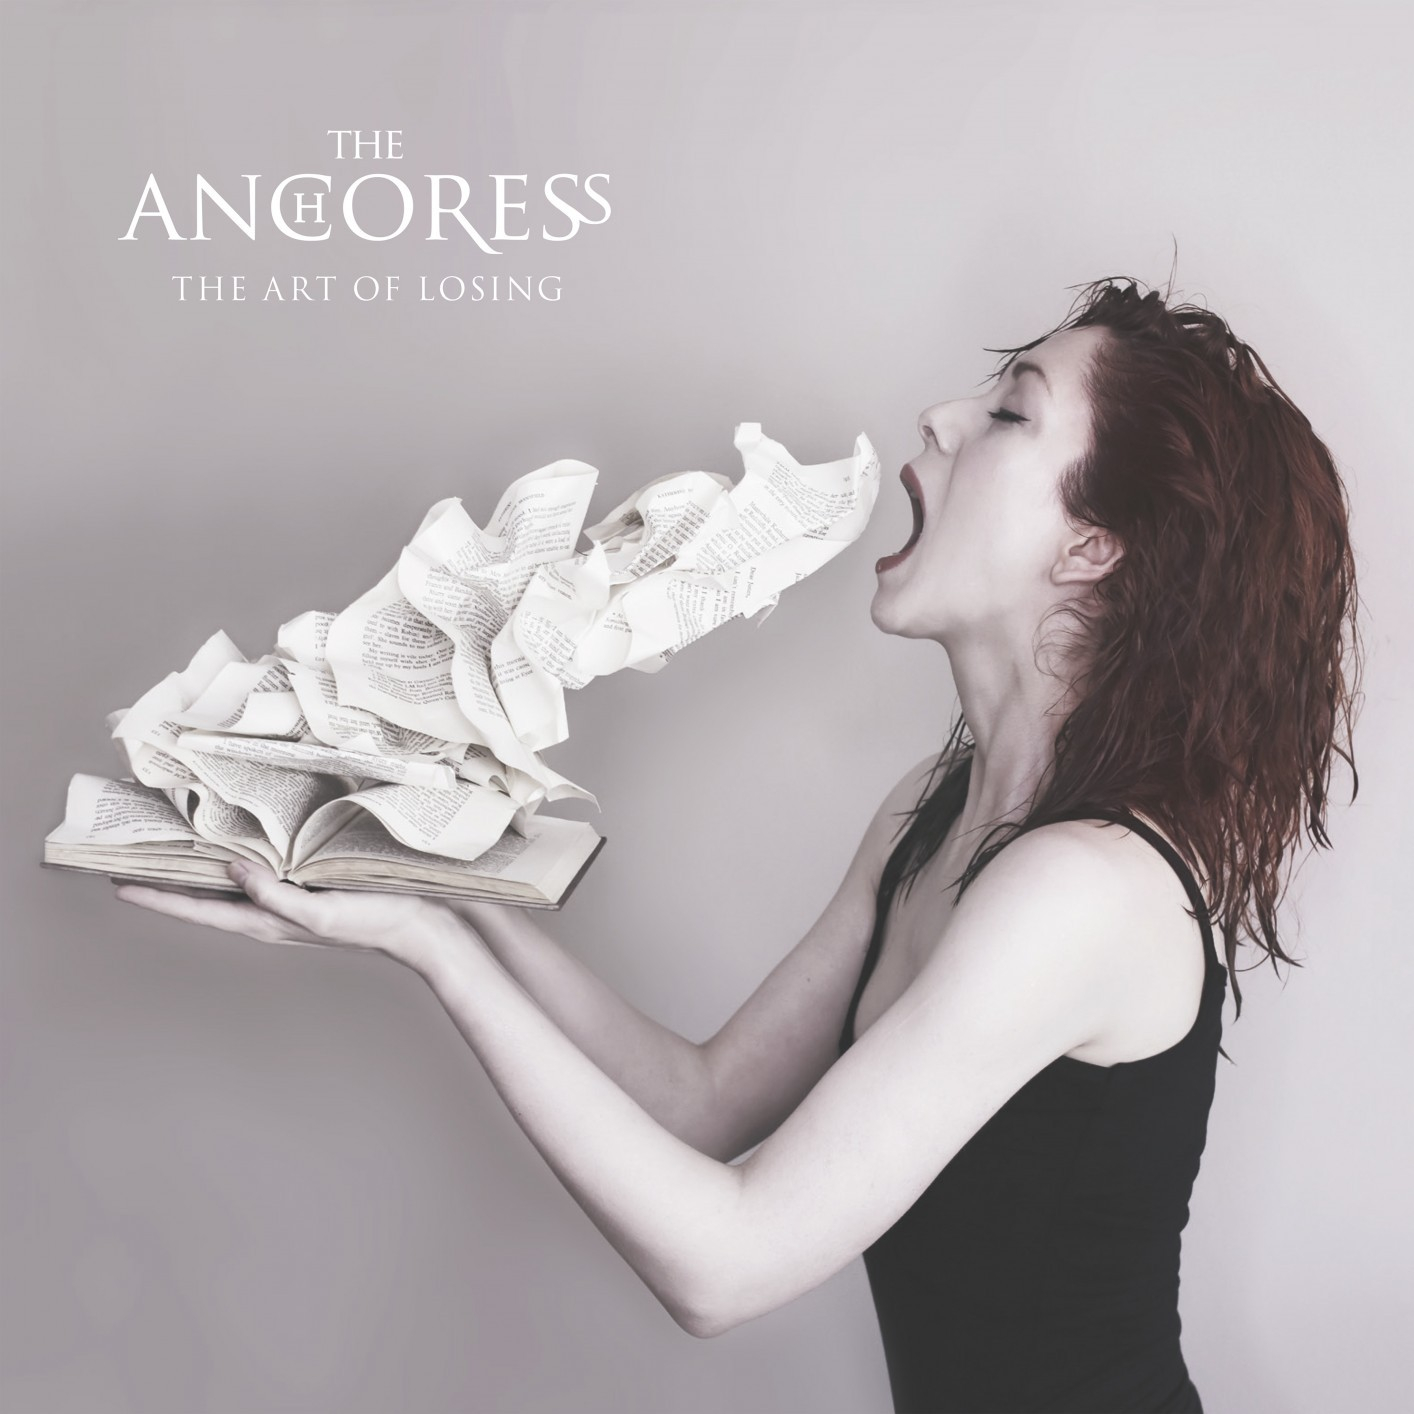 THE ANCHORESS: The Art Of Losing